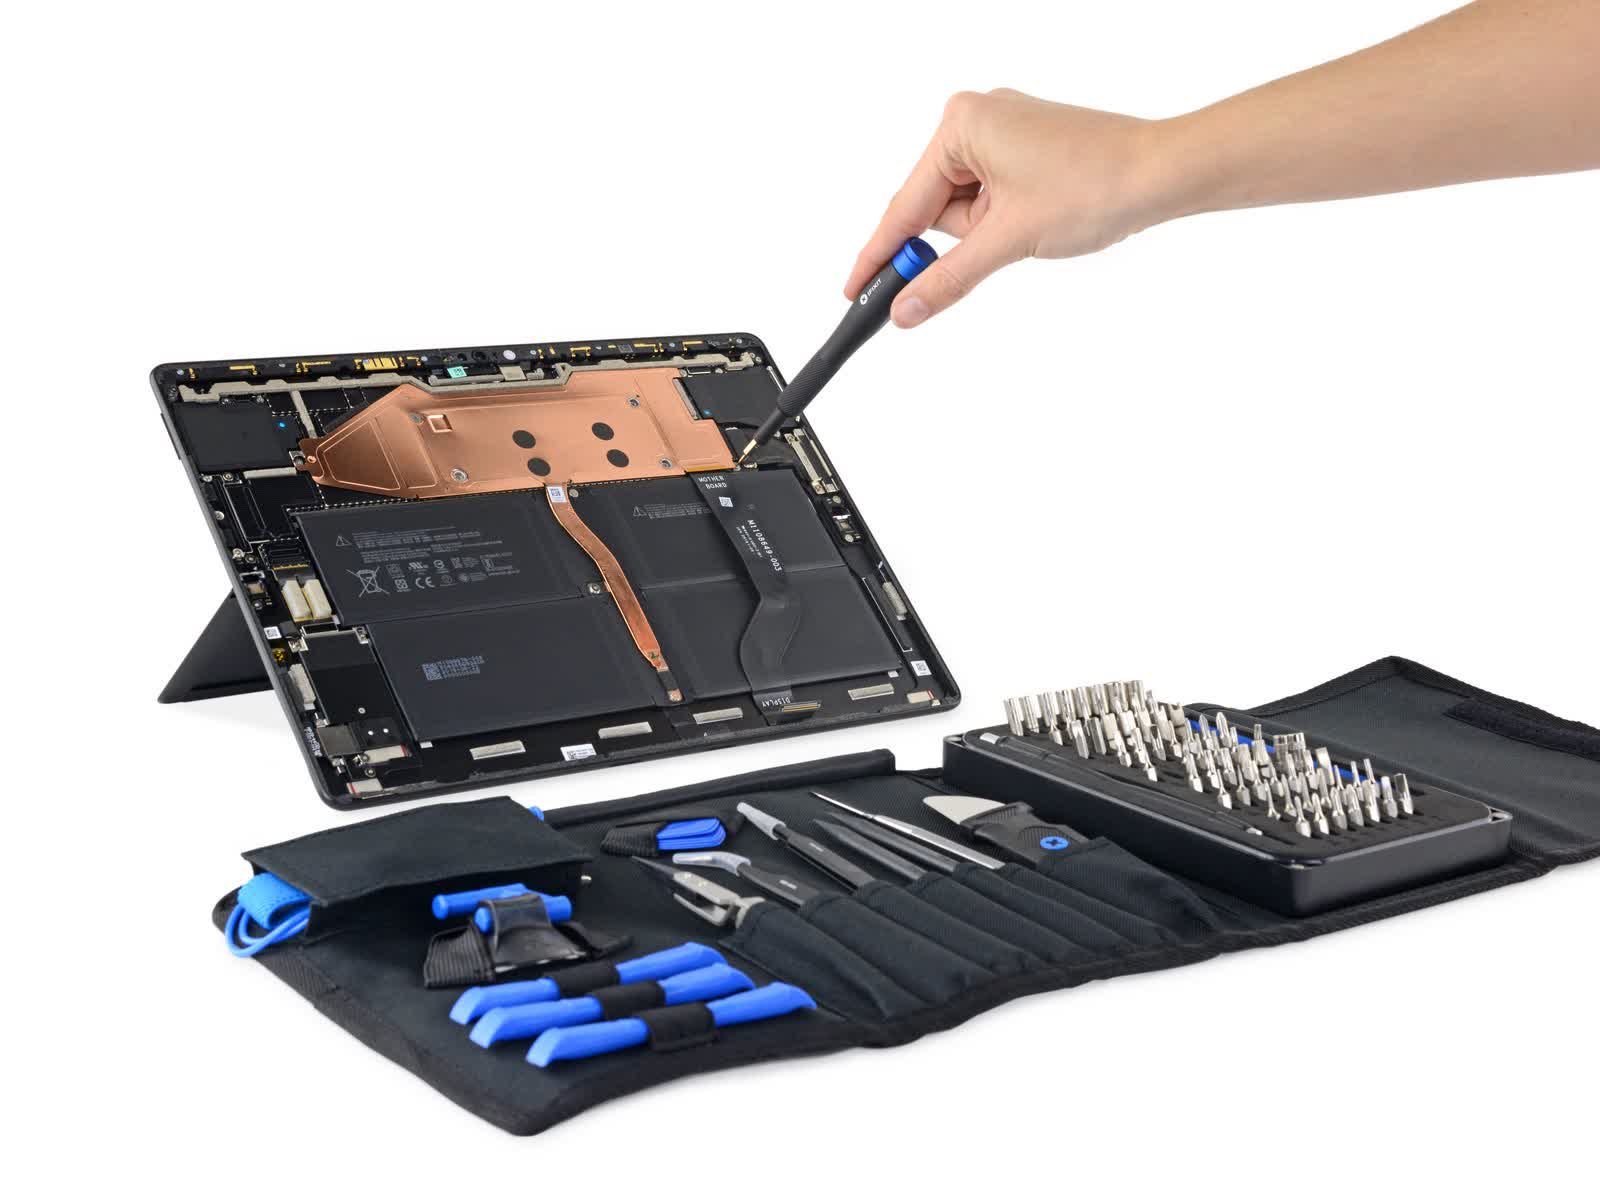 Microsoft partners with iFixit to make Surface devices easier to repair |  TechSpot